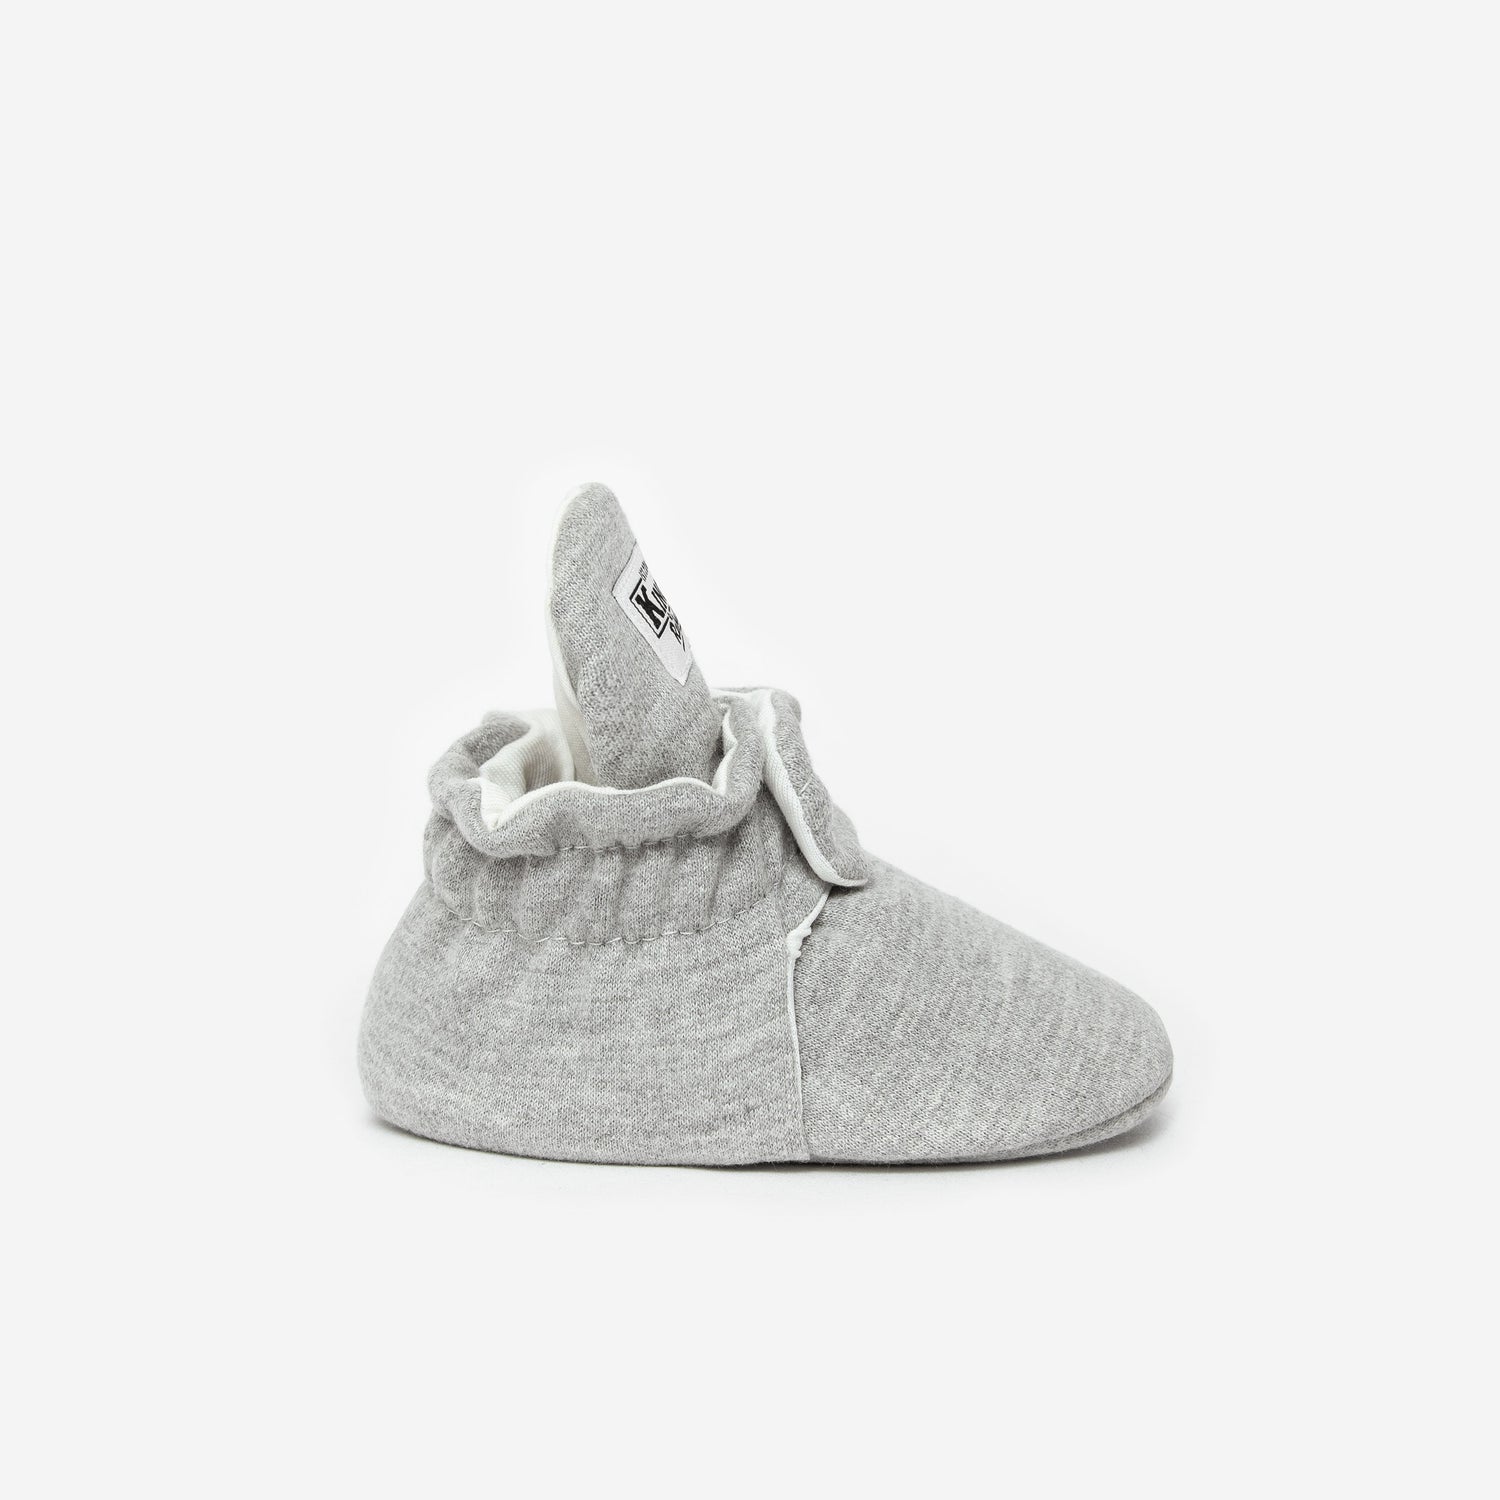 Cotton Booties 'Gripper'- Grey - The Little One • Family.Concept.Store. 